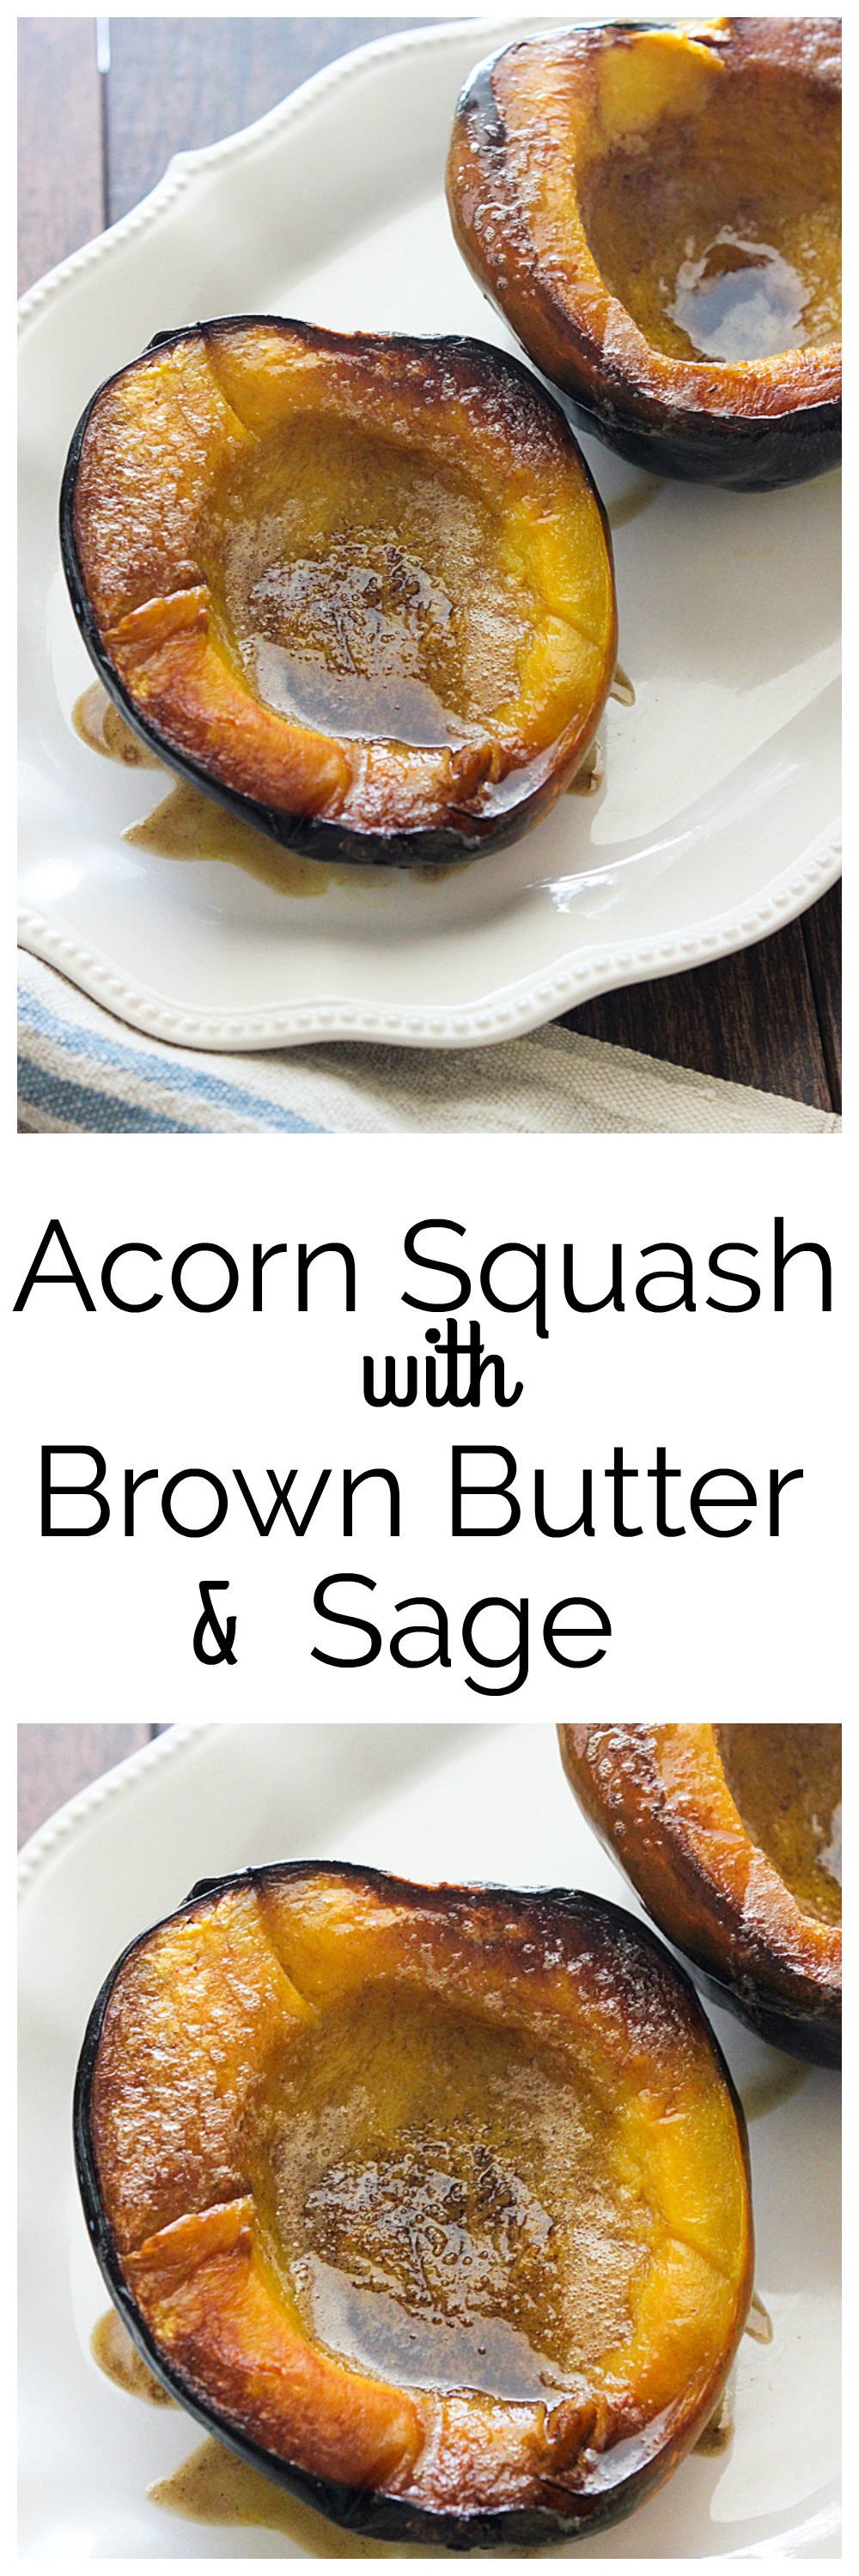 Acorn Squash with Brown Butter and Sage | Mandy's Recipe Box